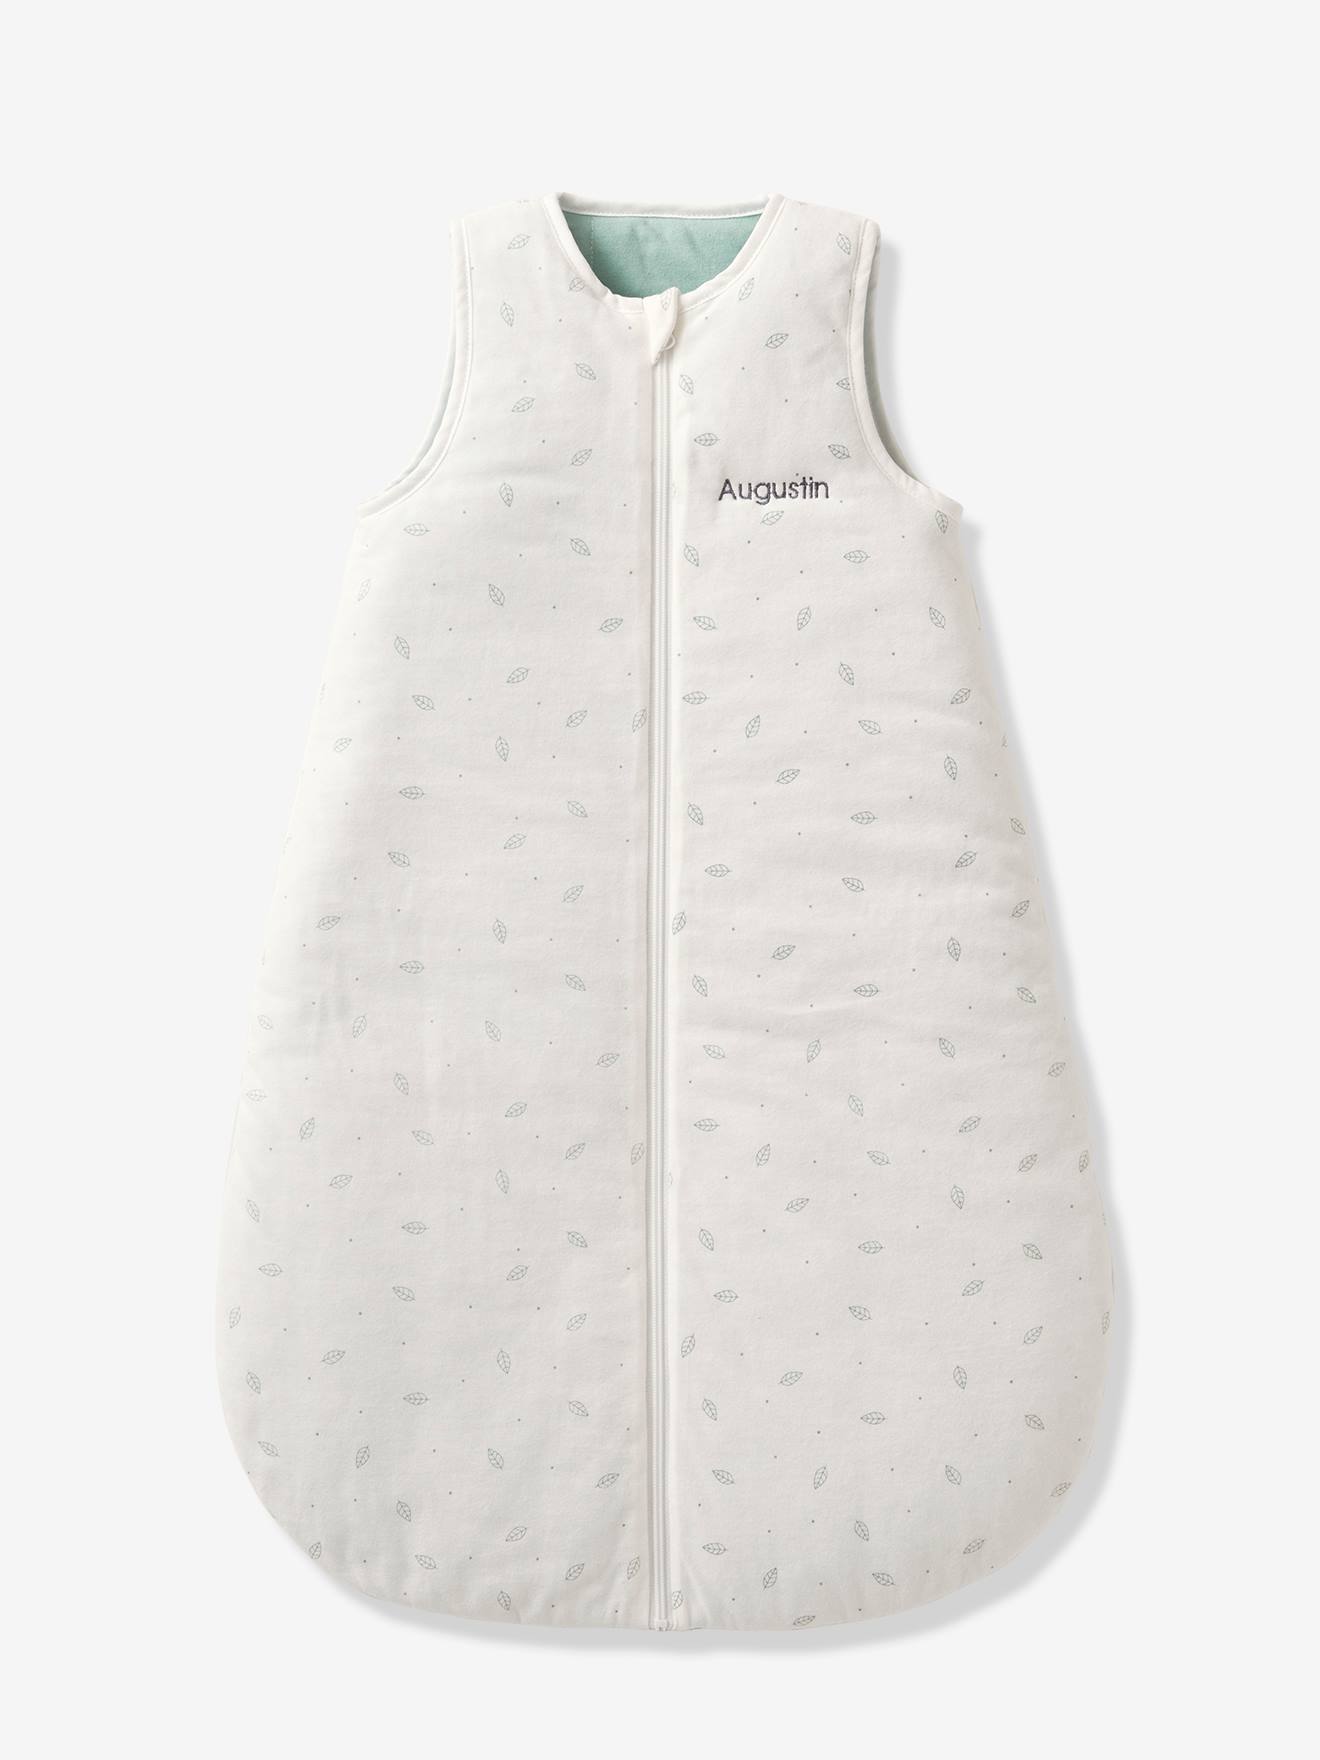 Baby Sleep Bag in Organic Cotton* with opening in the middle, Dreamy white medium all over printed